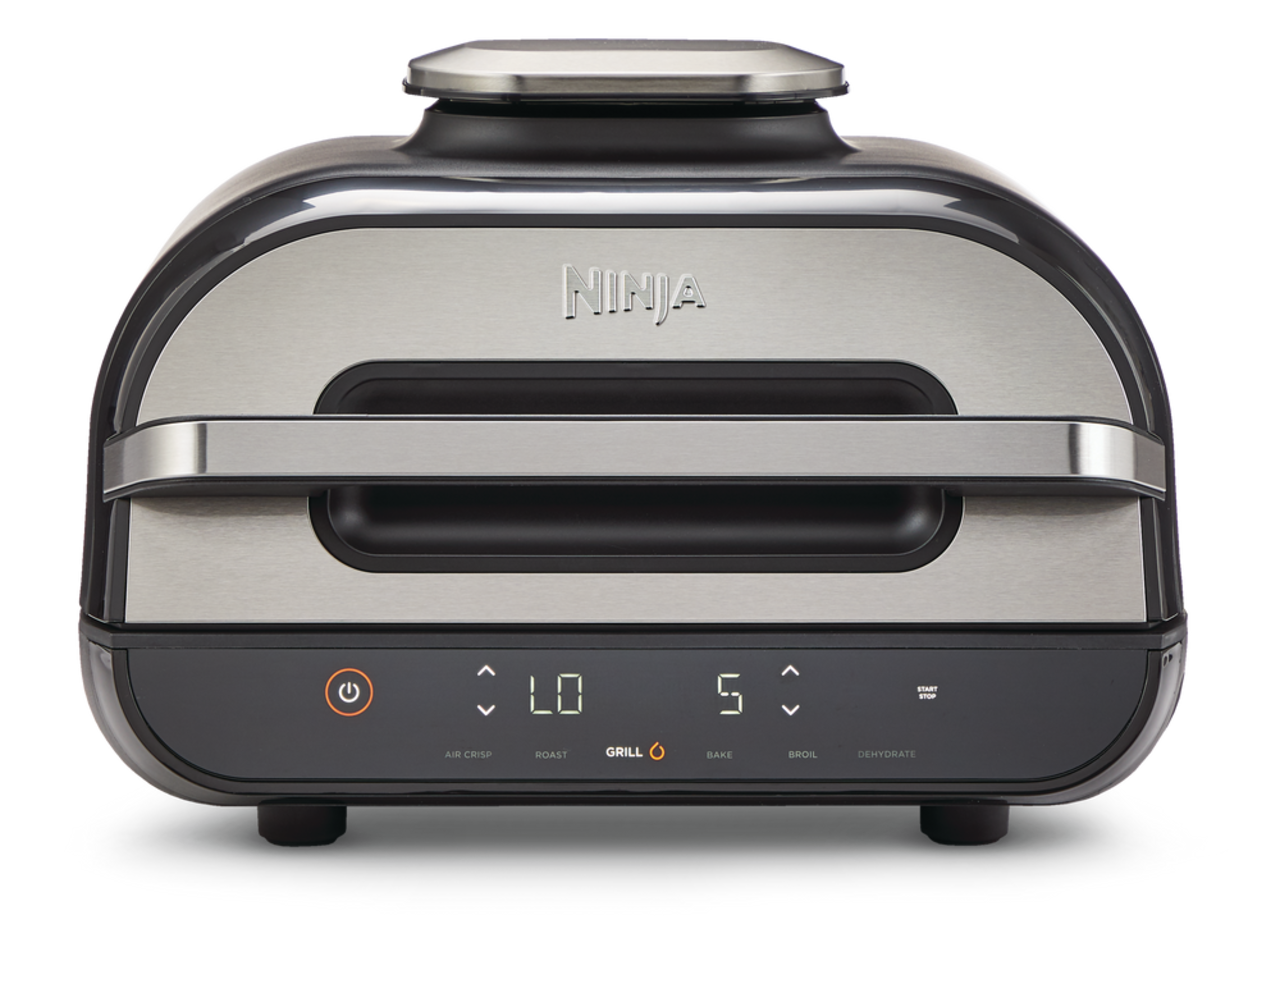 Ninja FG551 Foodi Smart XL 6-in-1 Indoor Grill with Air Fry, Roast, Bake,  Broil & Dehydrate, Smart Thermometer, Black/Silver